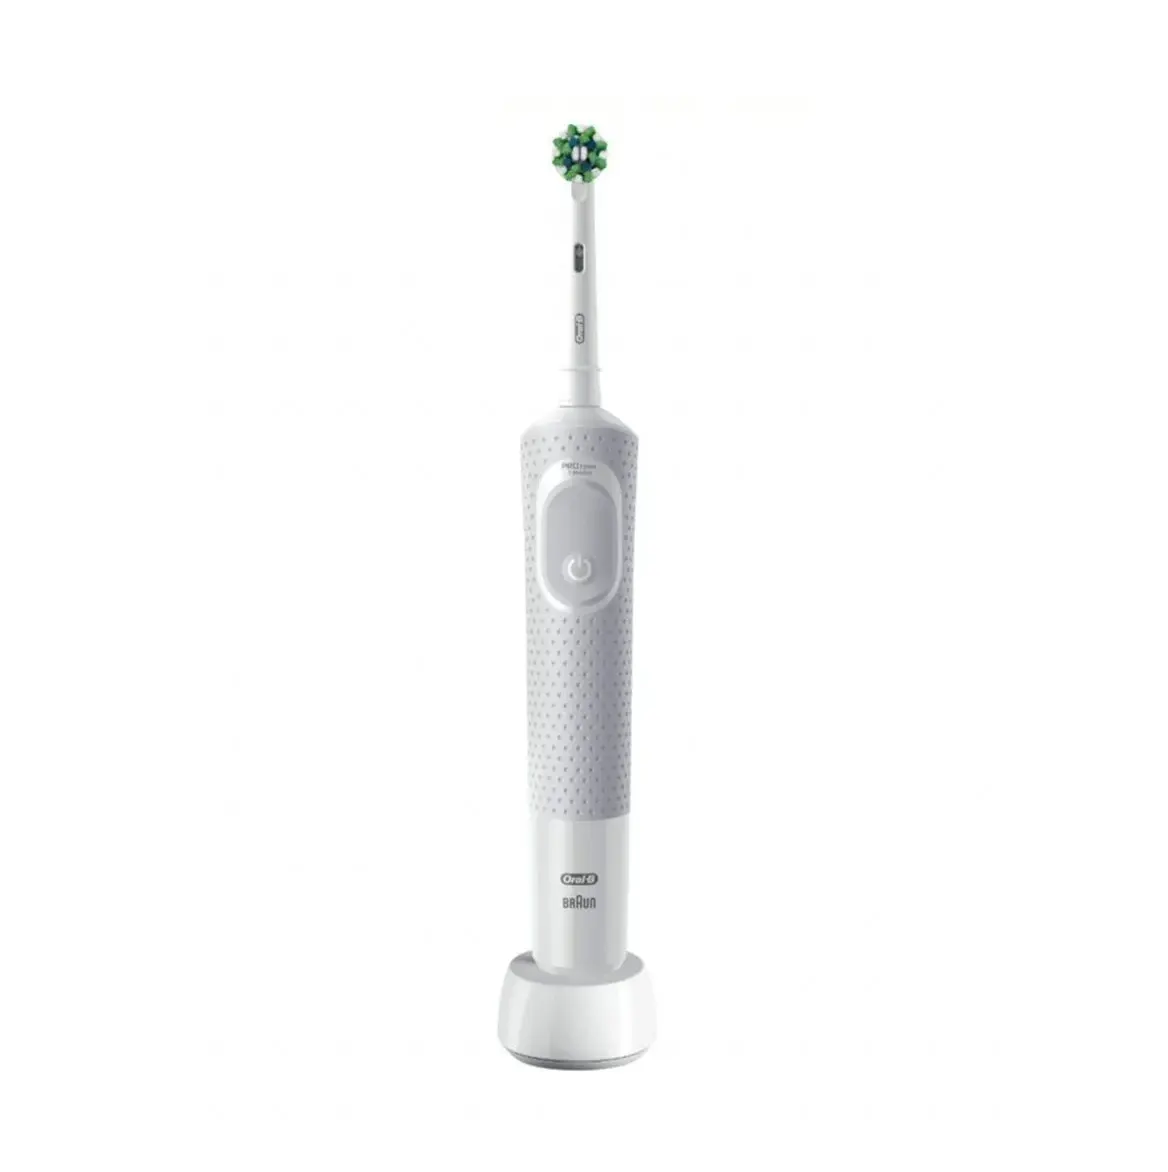 Direct Supplier Of Oral-B Pro 1000 Electric Toothbrush, Black & White At Wholesale Price